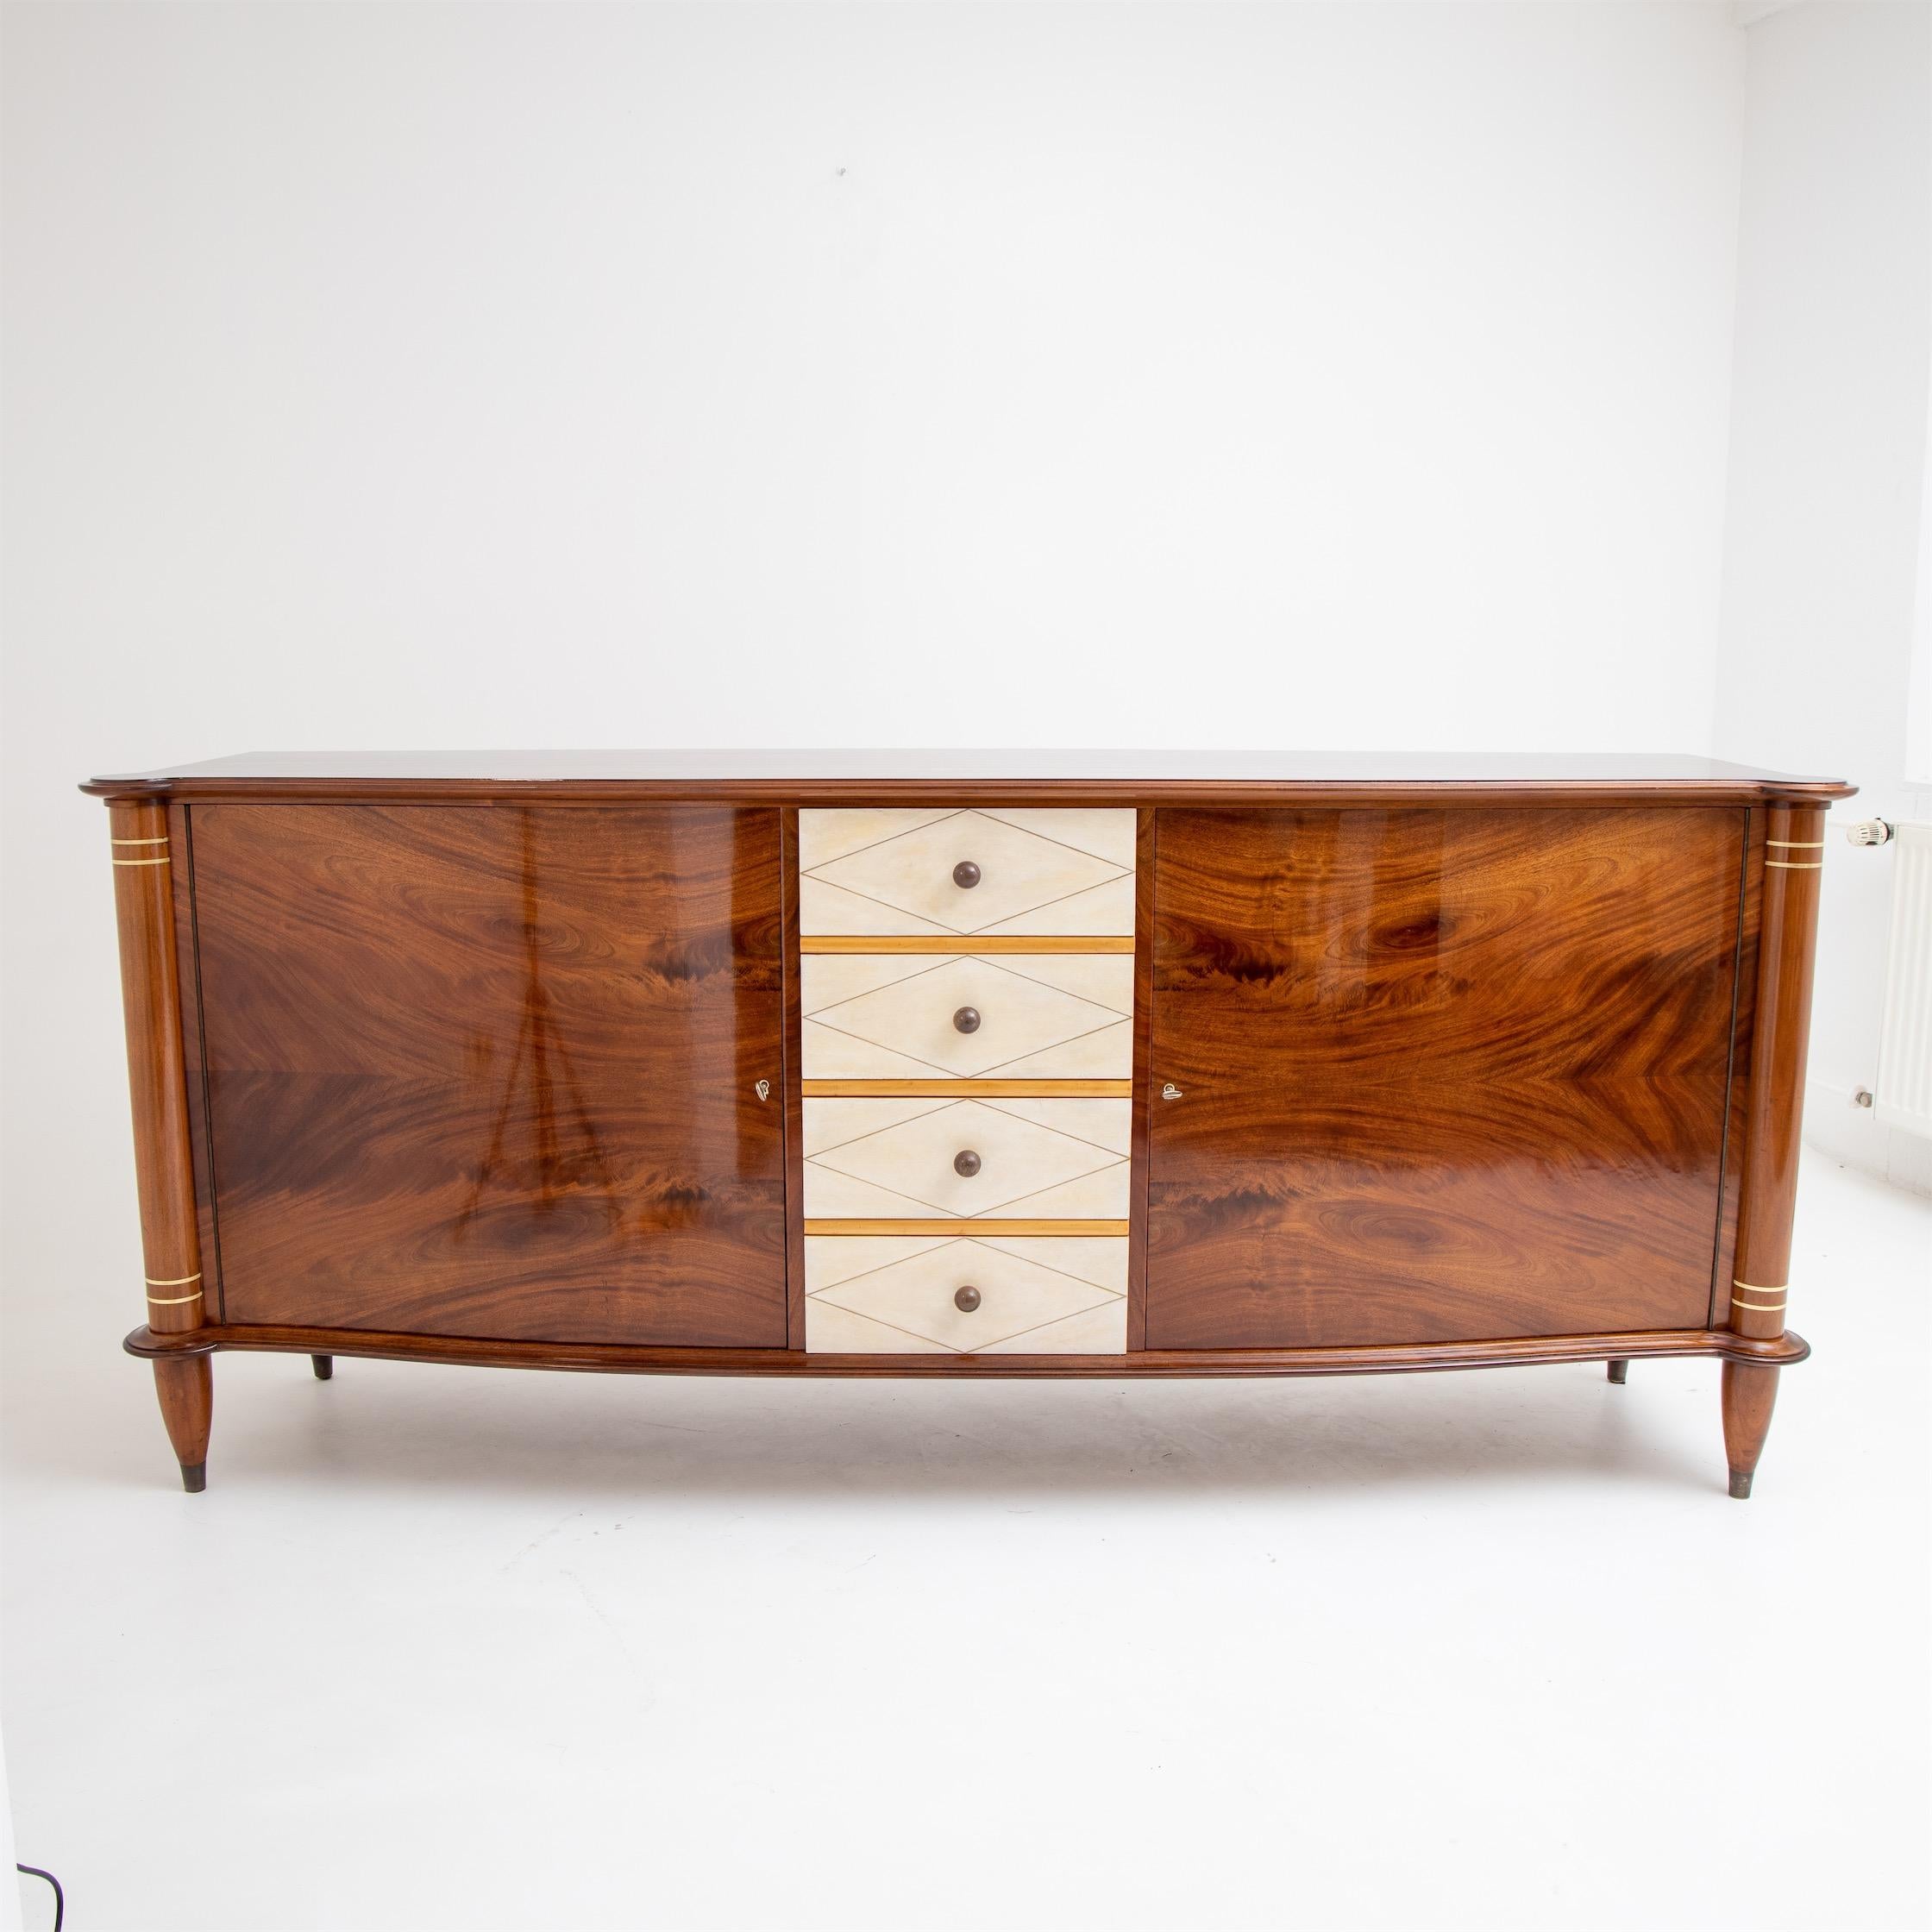 Three-door sideboard in the style of Leleu with brass profiles and rounded corners. The body is veneered in mahogany and has a gently curved bow front. The sideboard has been expertly restored and hand polished.